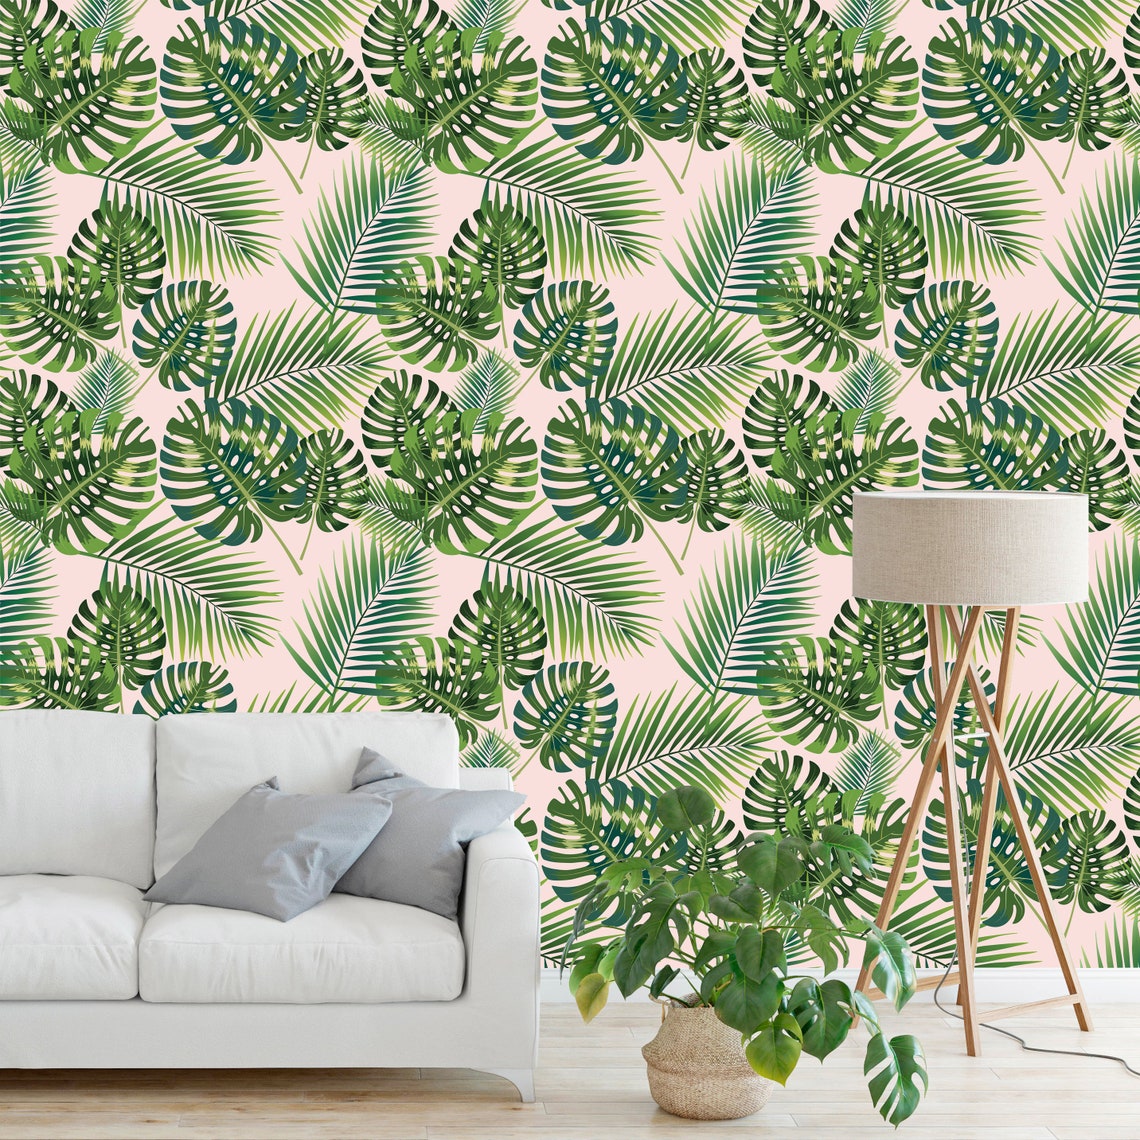 Tropical Palm Leaf Removable Wallpaper Peel and Stick - Etsy